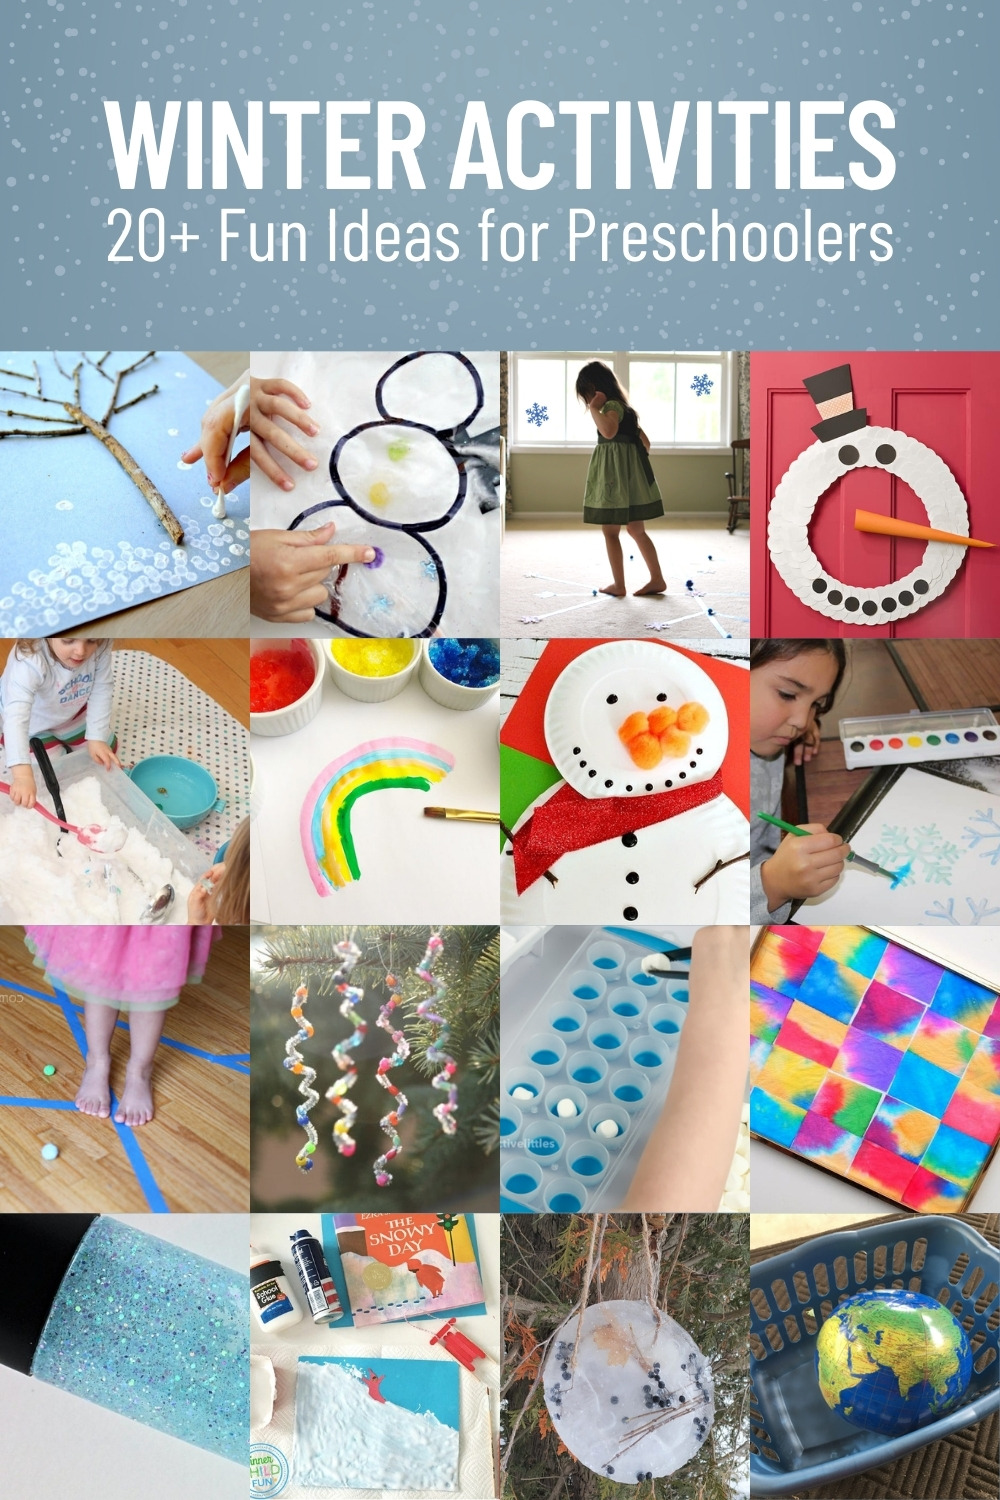 30+ Preschool Winter Crafts to Try When It's Chilly - Fun-A-Day!